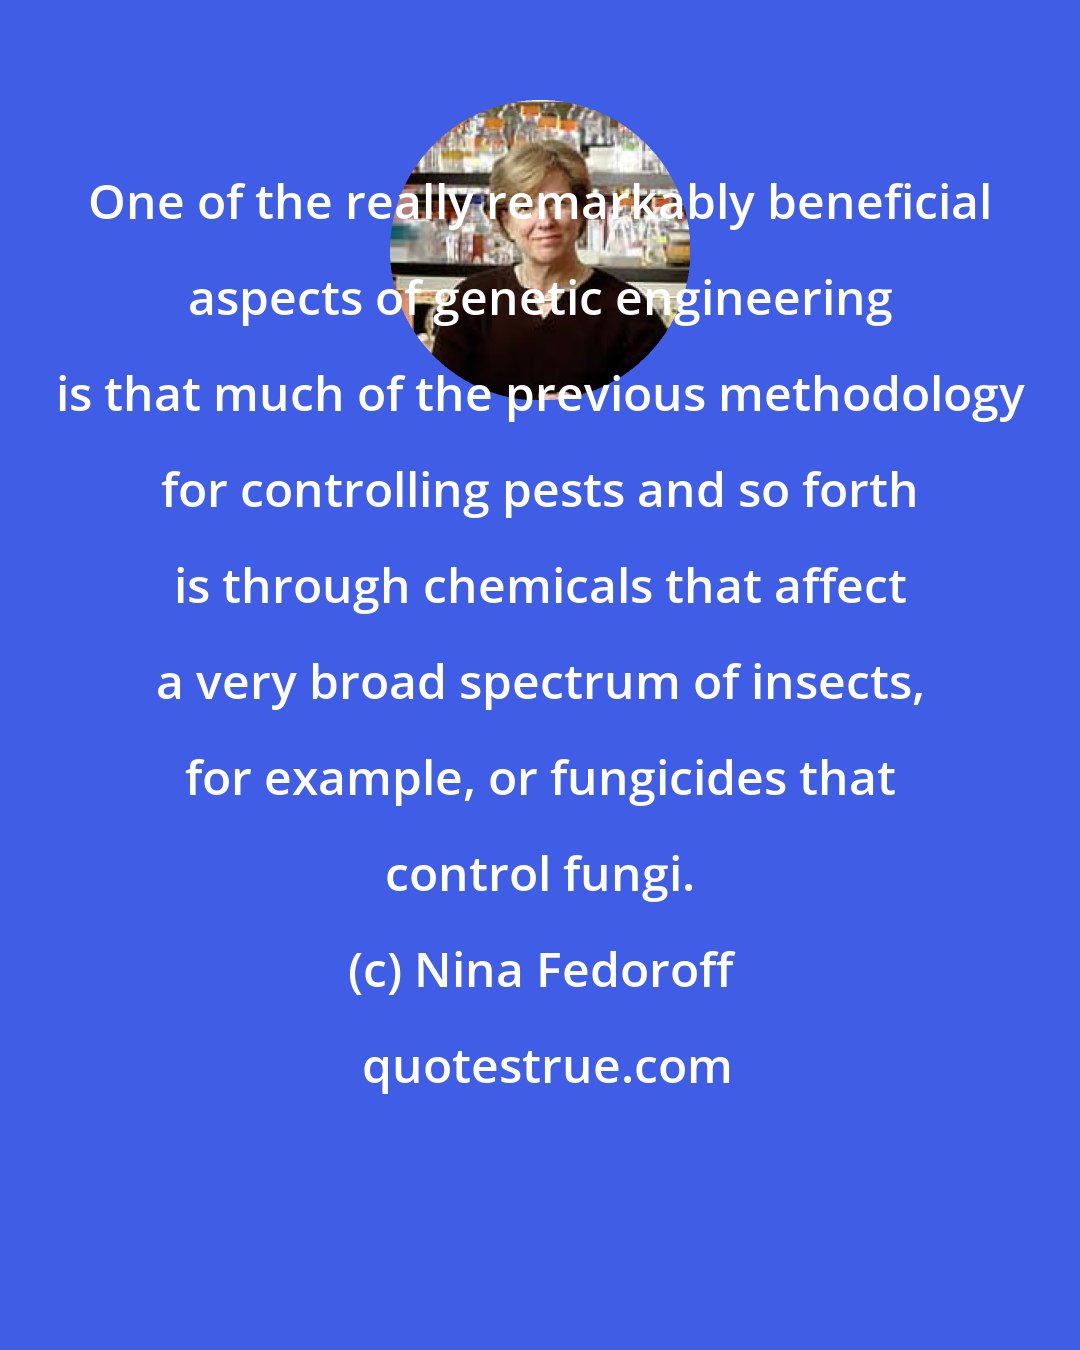 Nina Fedoroff: One of the really remarkably beneficial aspects of genetic engineering is that much of the previous methodology for controlling pests and so forth is through chemicals that affect a very broad spectrum of insects, for example, or fungicides that control fungi.